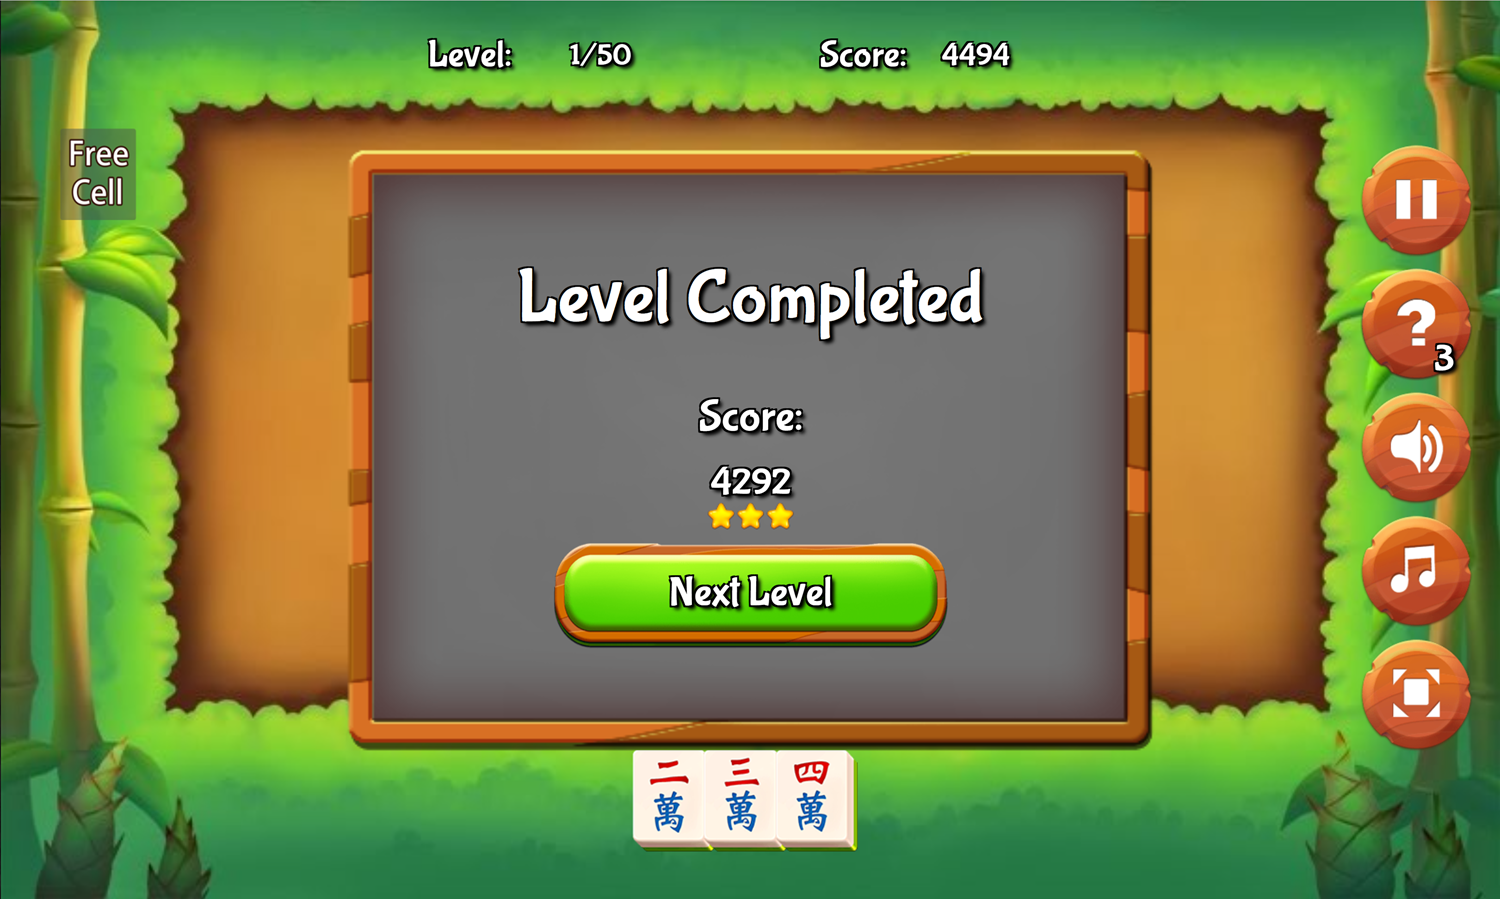 Mahjong Sequence Game Level Completed Screen Screenshot.